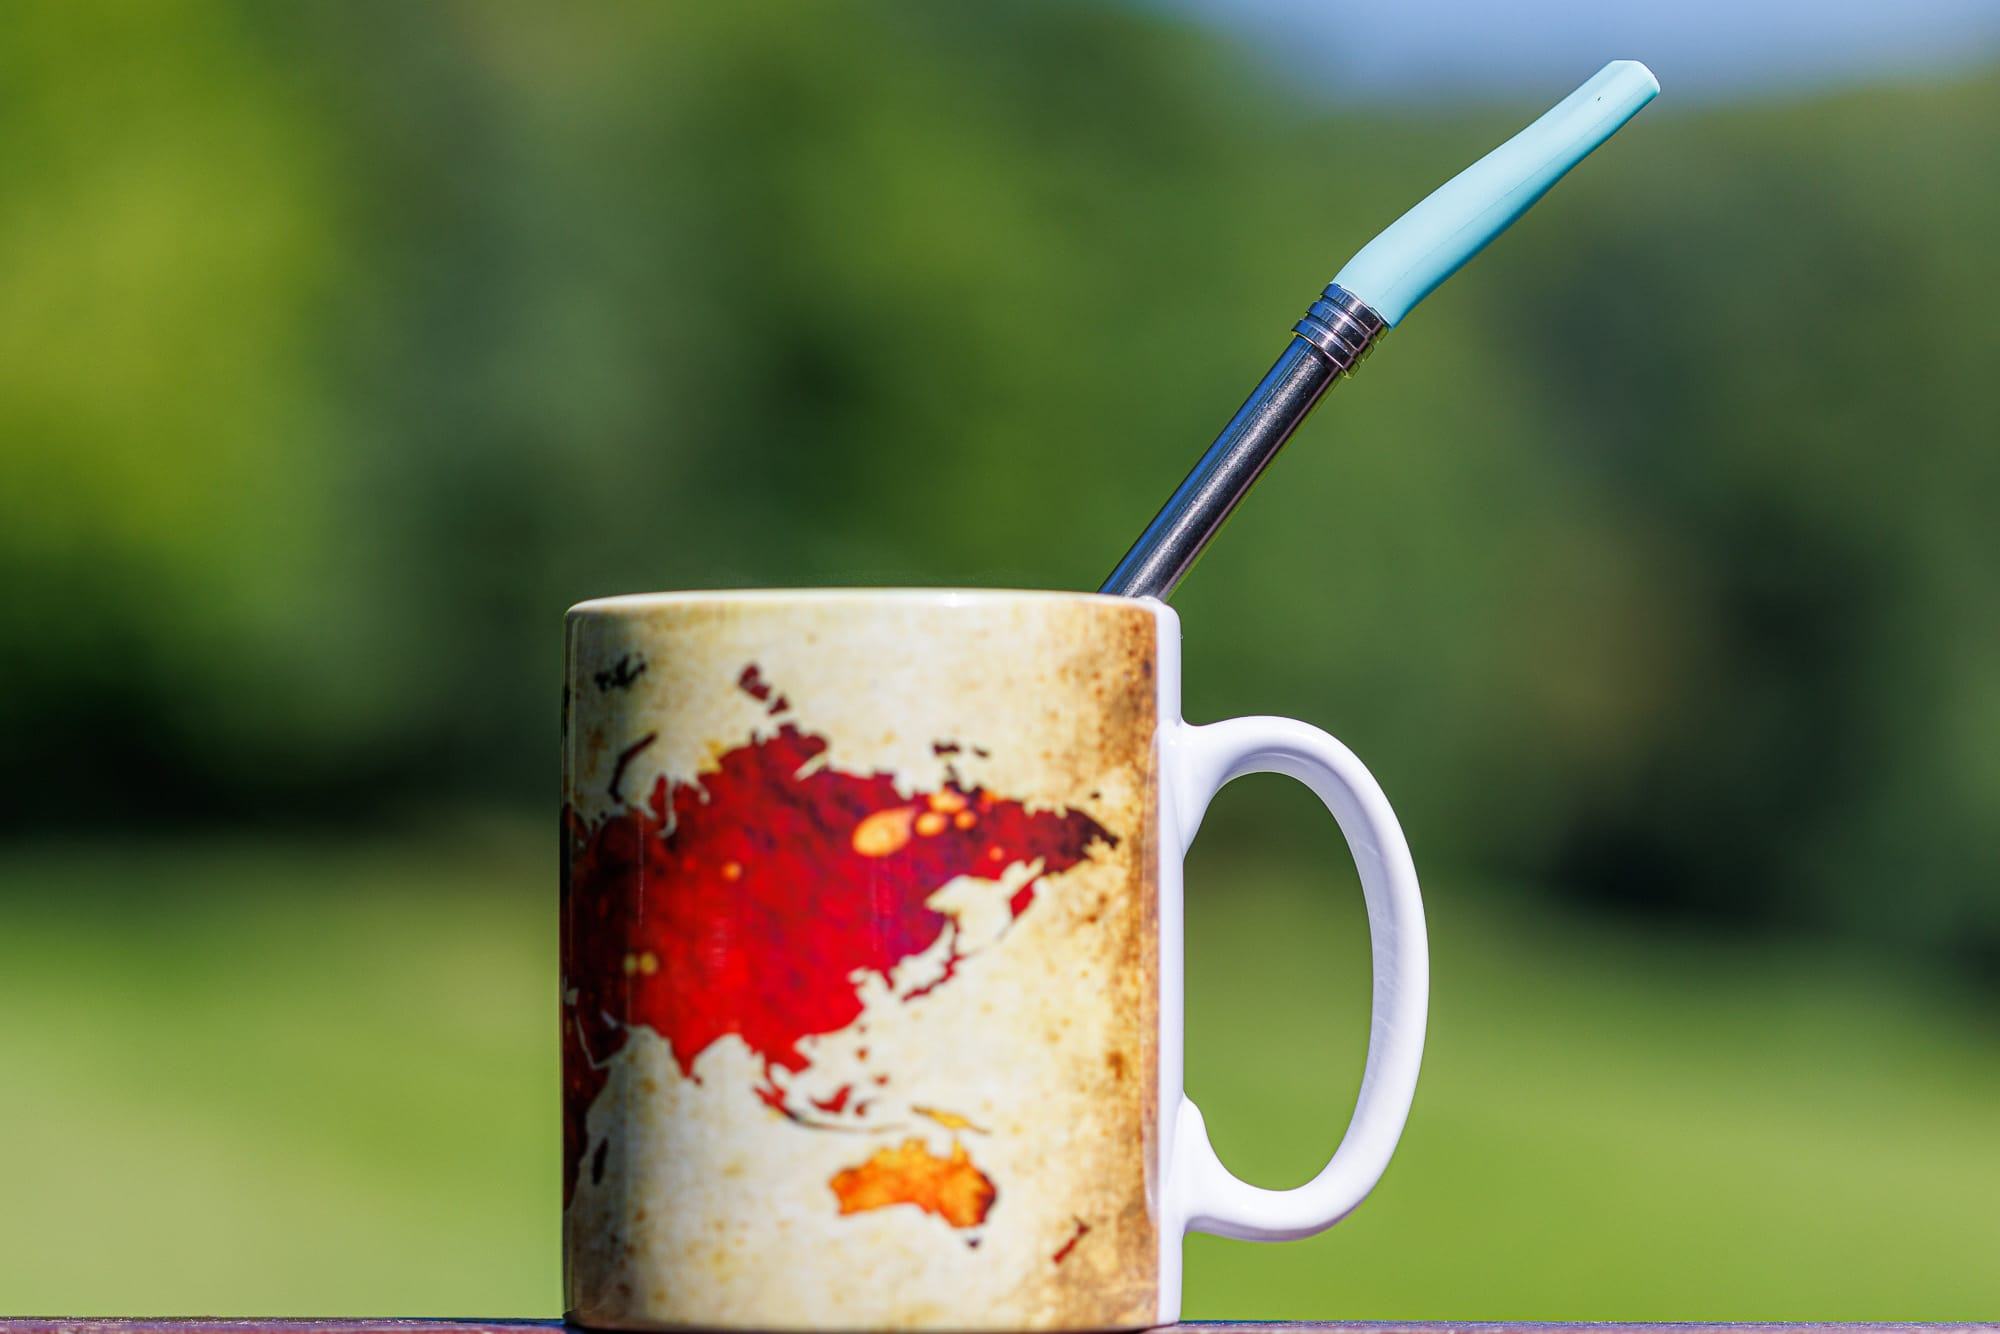 https://www.findingtheuniverse.com/wp-content/uploads/2020/03/JoGo-Coffee-Straw-by-Laurence-Norah-4.jpg